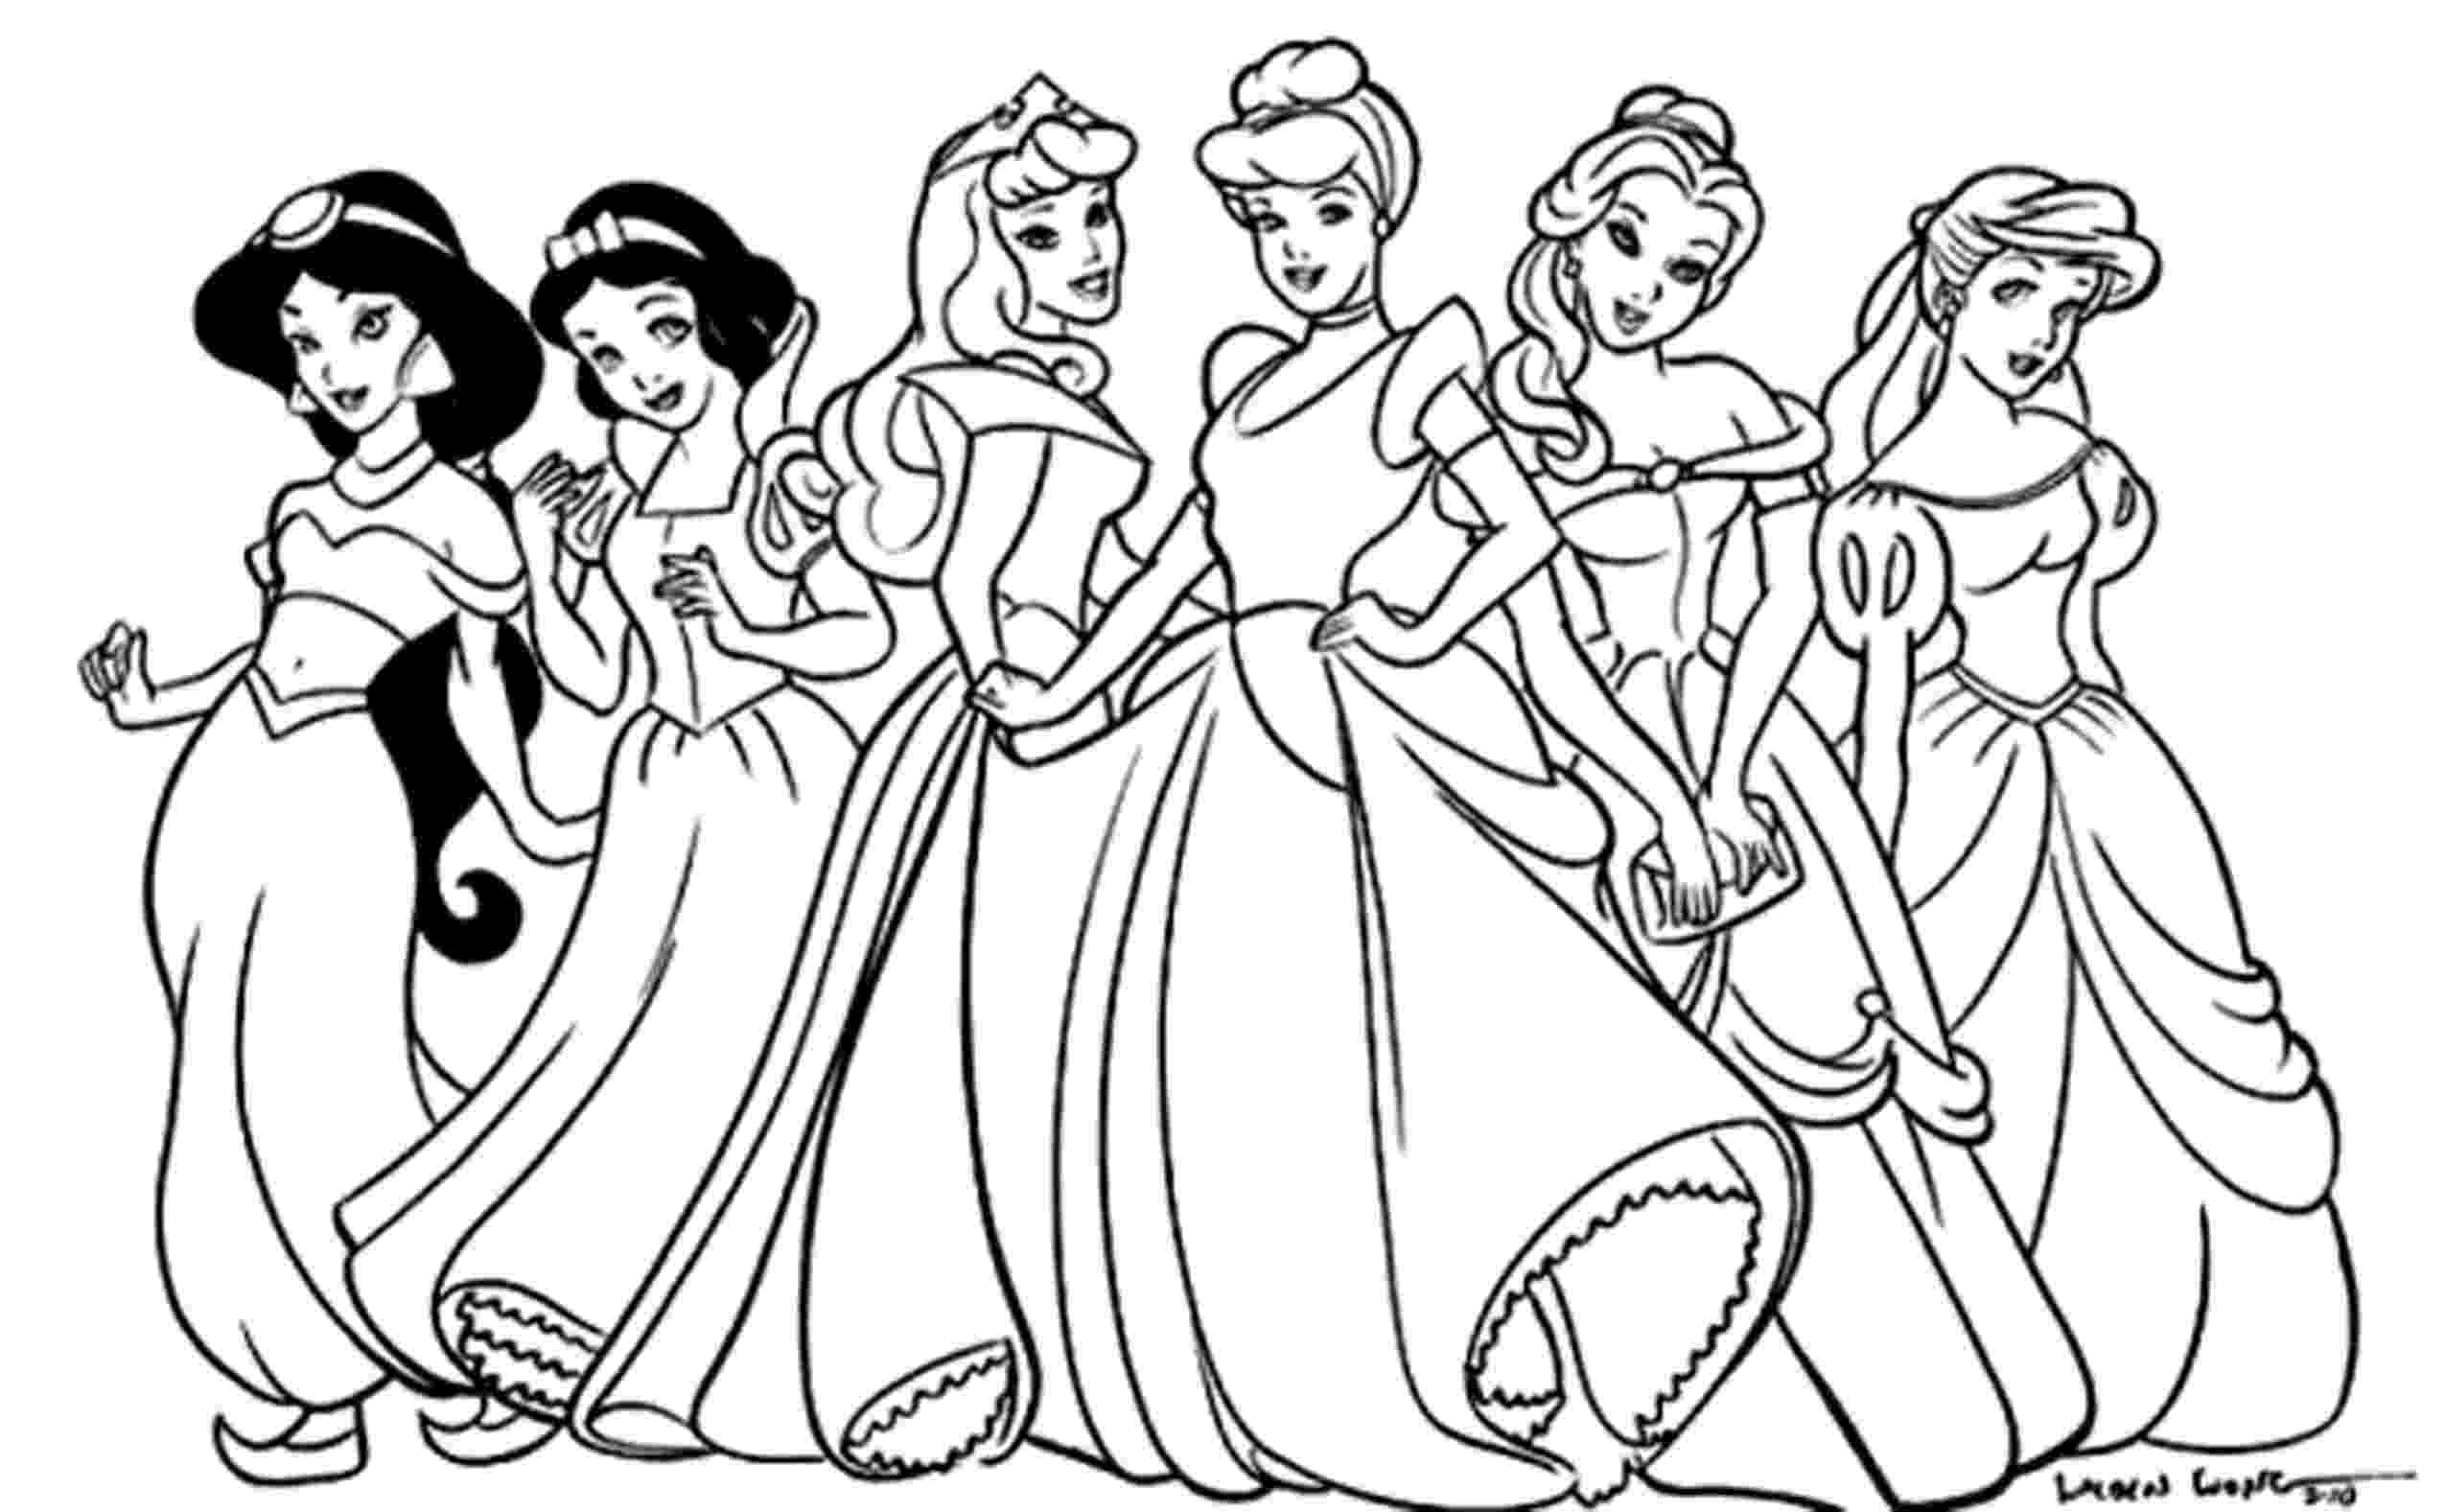 printable coloring pages for disney princess disney princess coloring pages moana coloring pages pages for printable disney princess coloring 